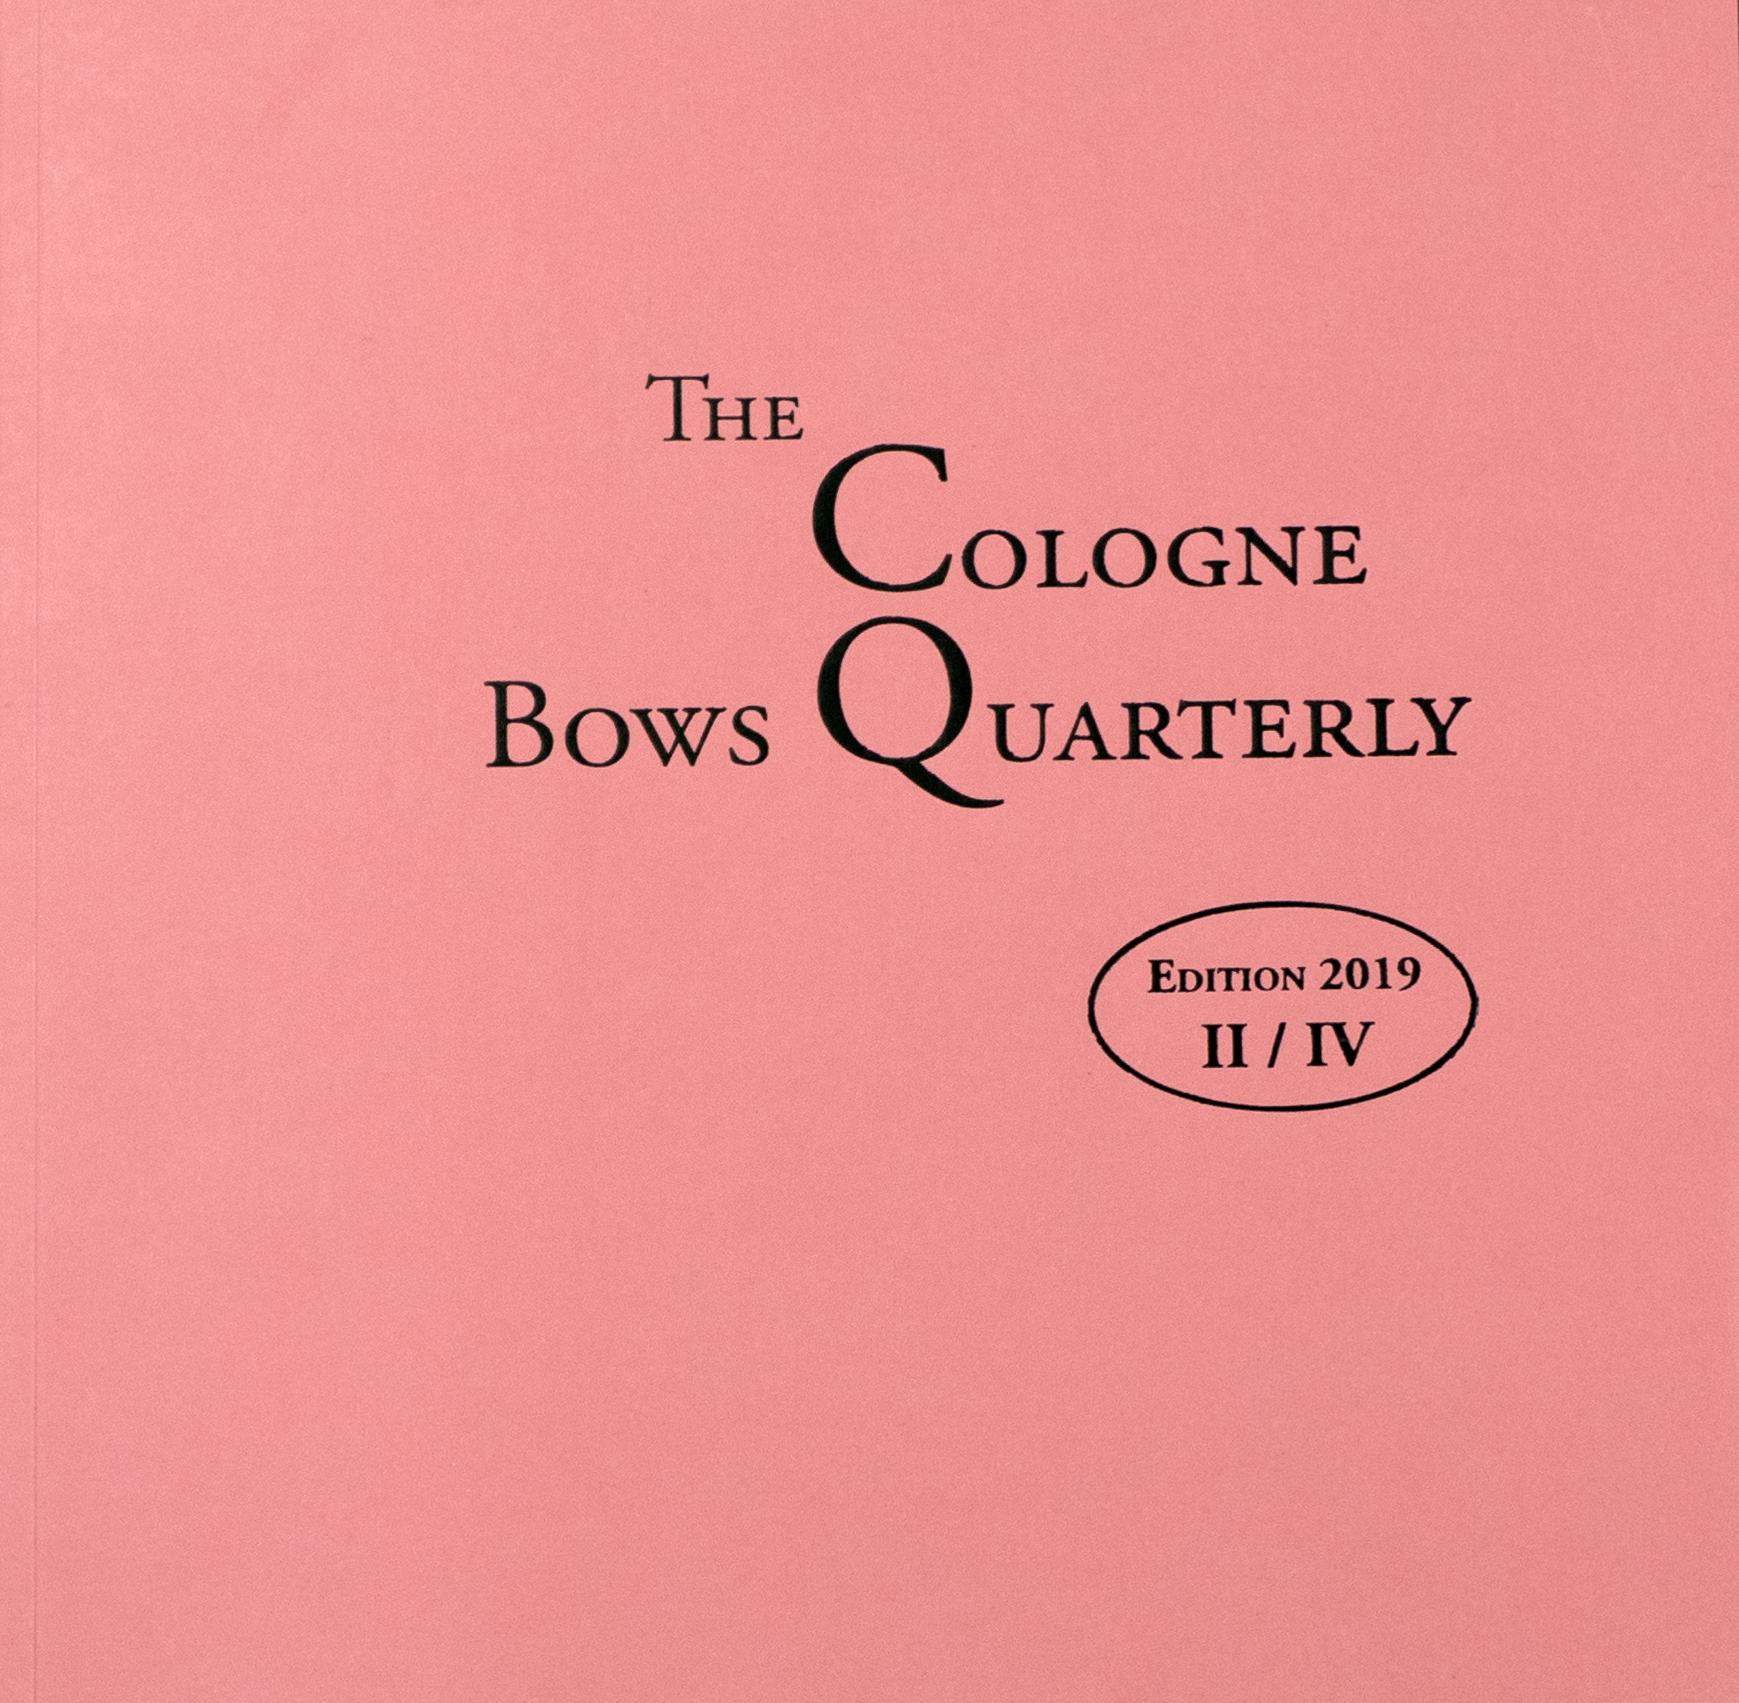 The Cologne Bows Quarterly - Edition 2019 II / IV